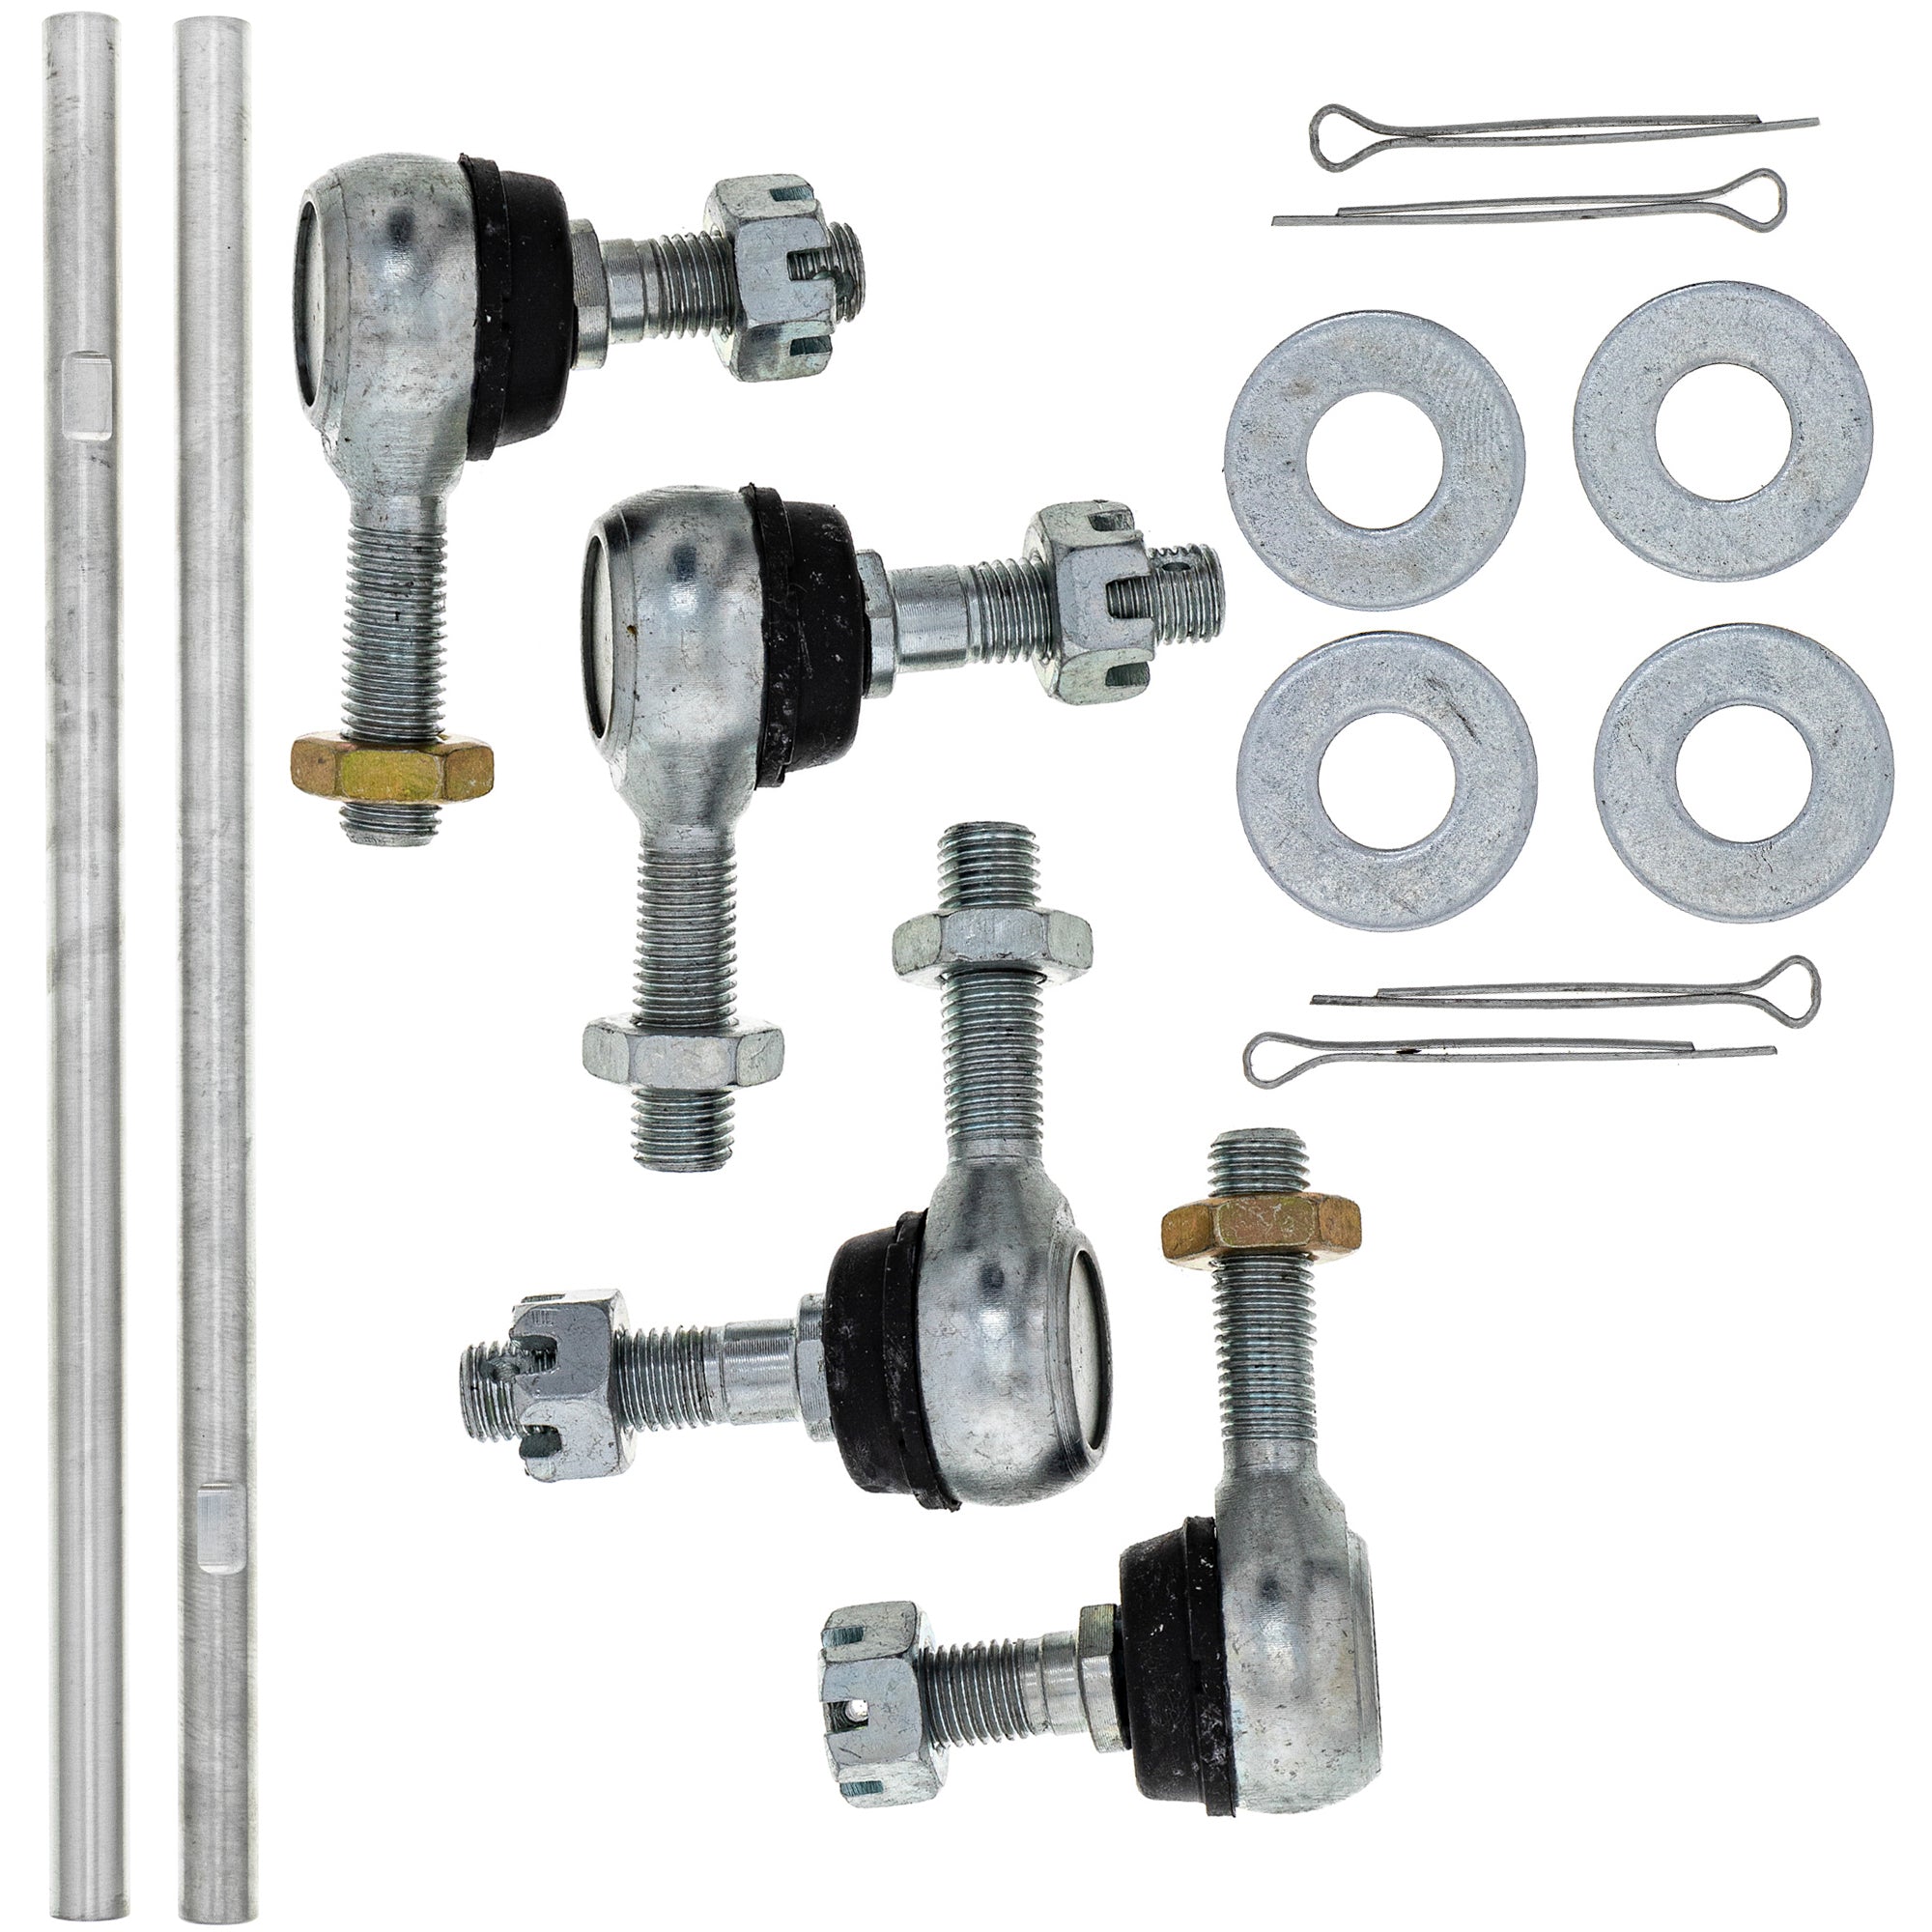 Tie Rods & Tie Rods Ends Kit for Polaris Arctic Cat Textron Outlaw NICHE MK1006290